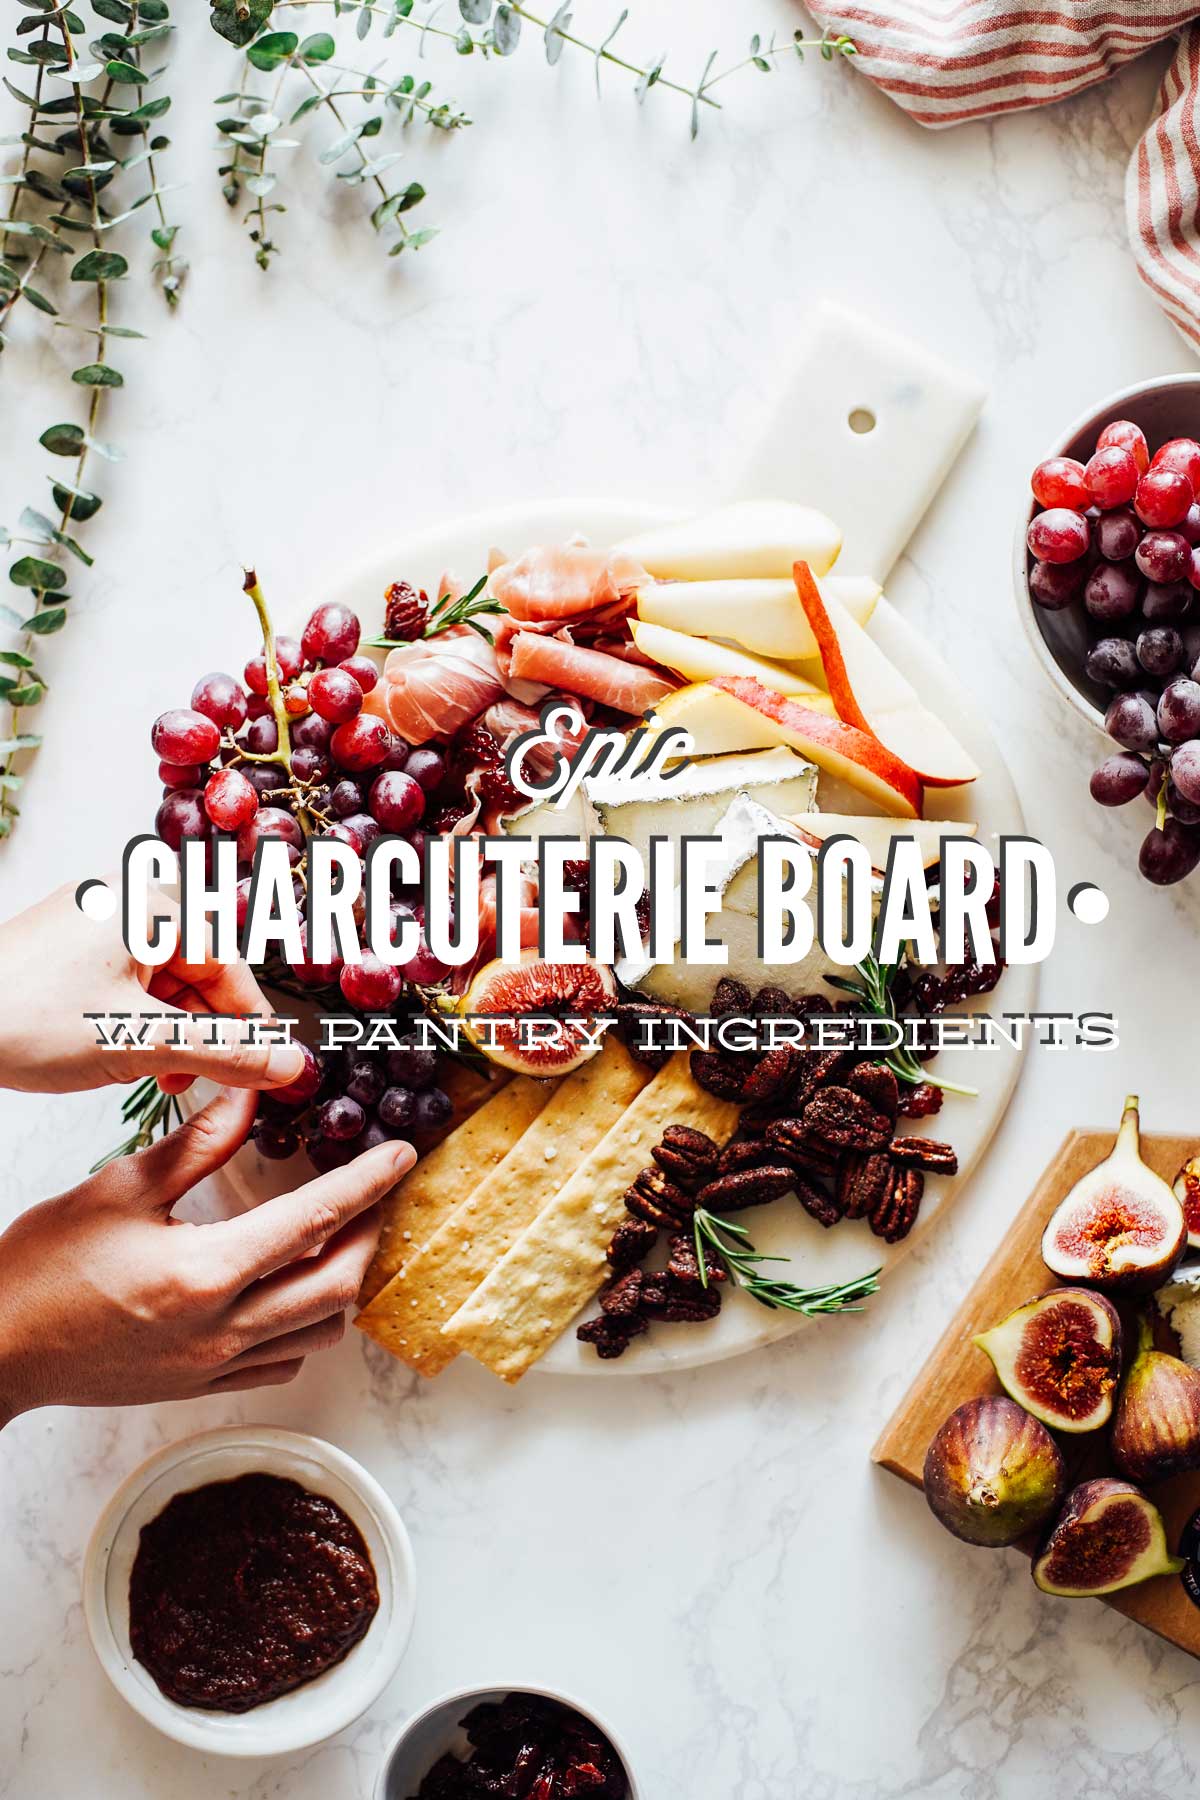 How Make an Epic Charcuterie Board with Pantry Ingredients